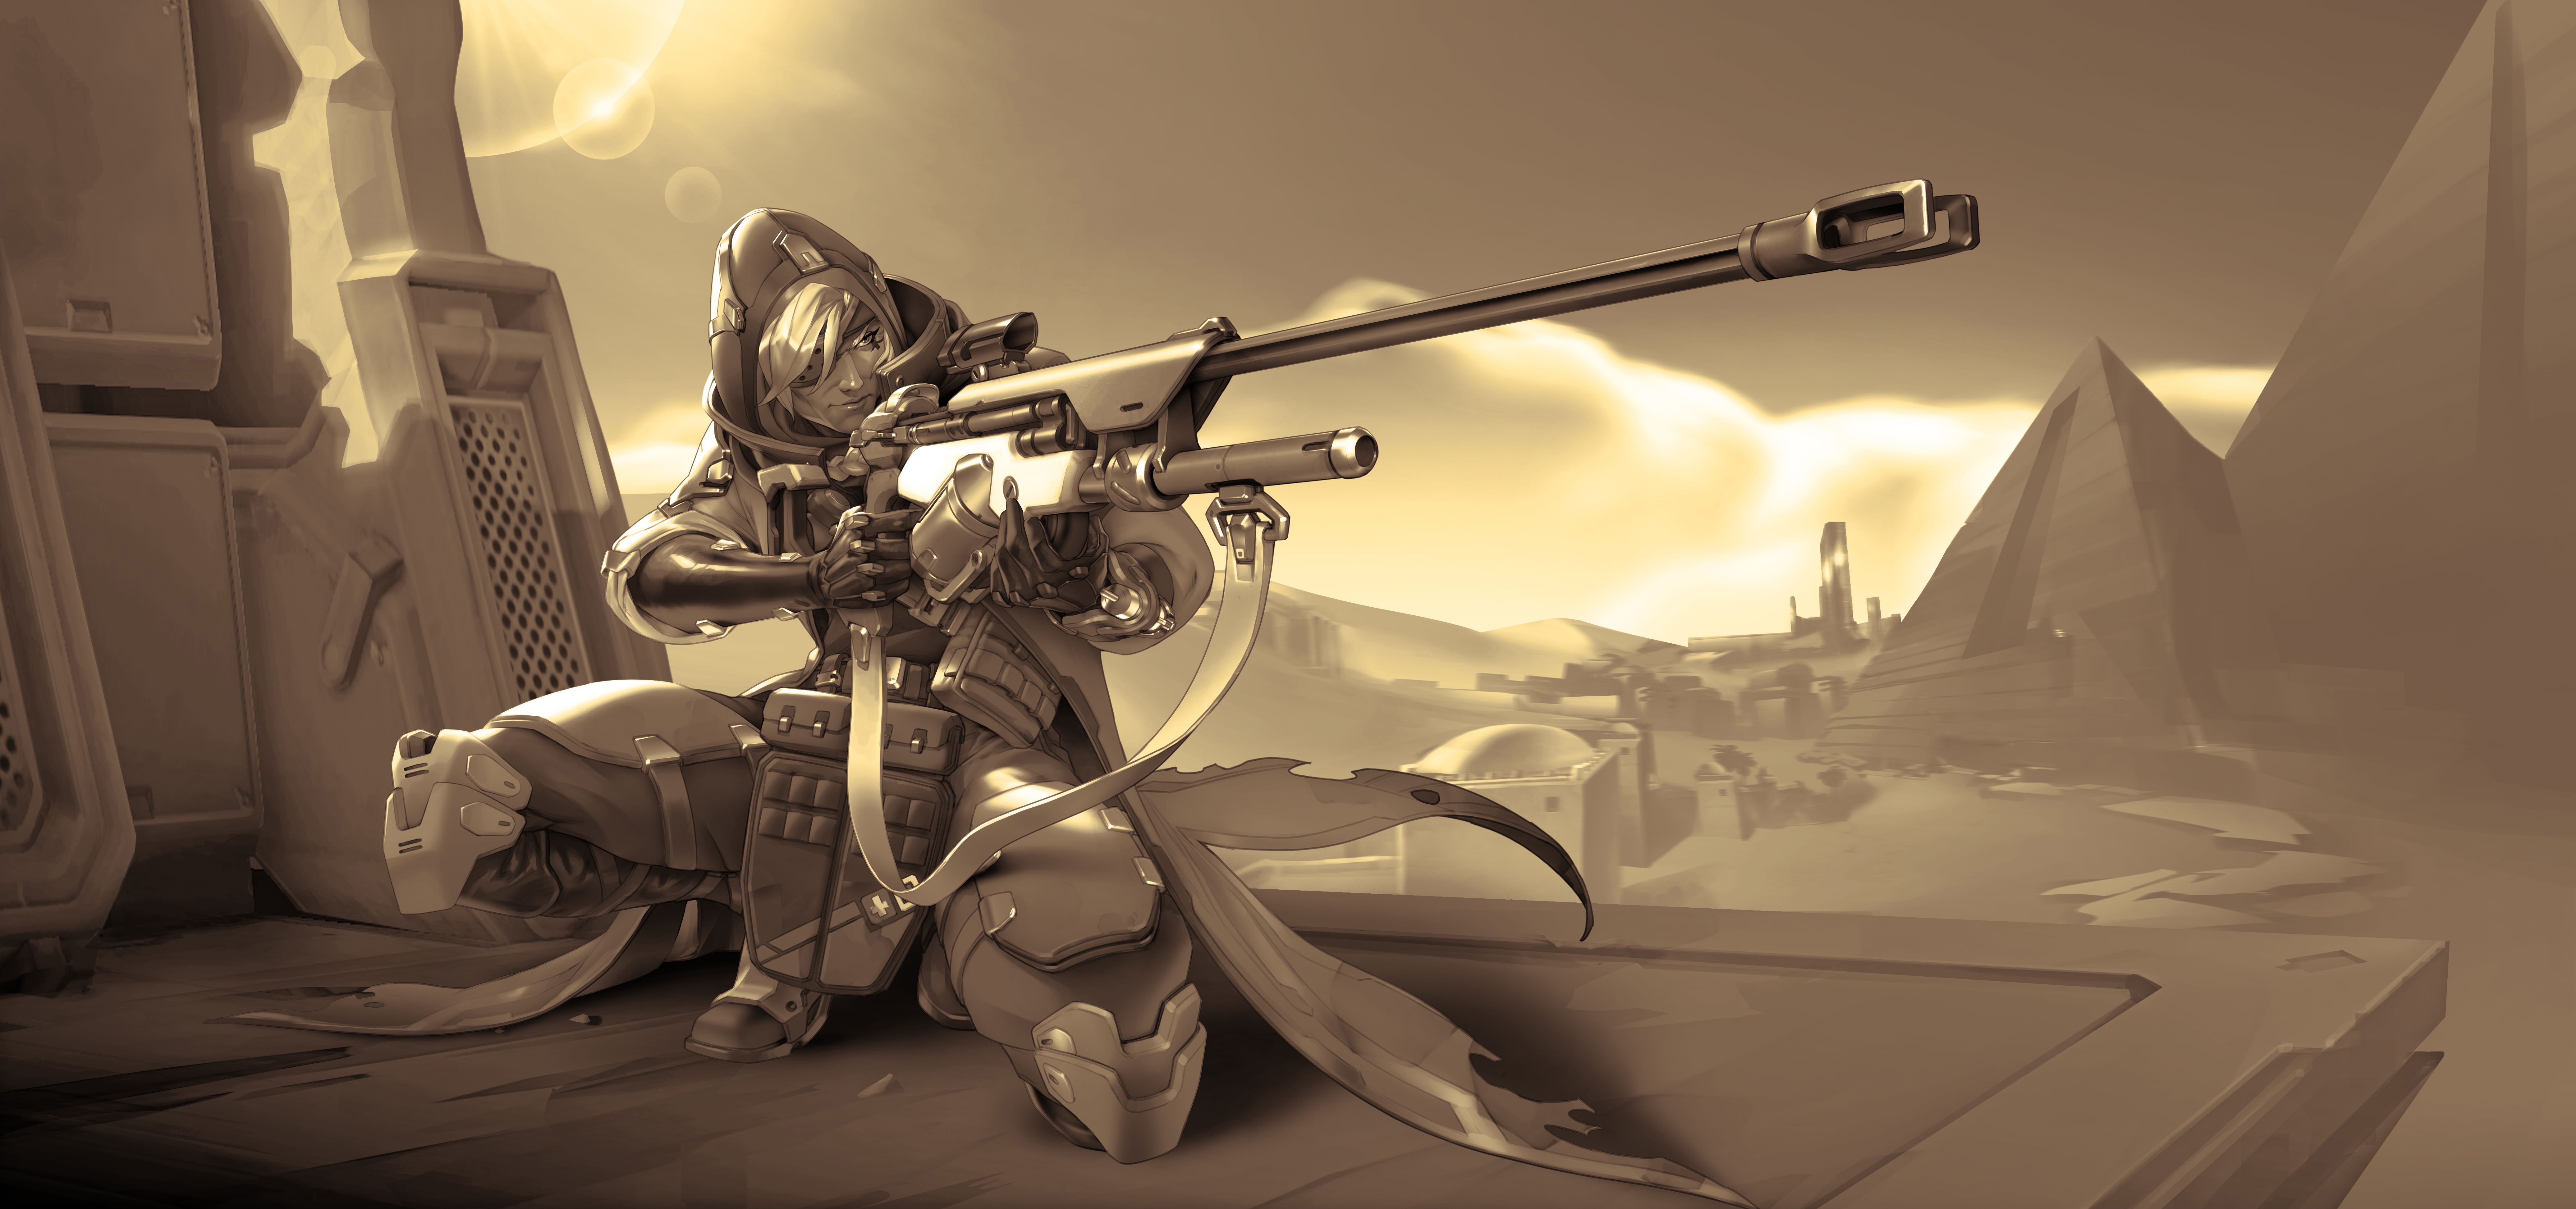 Sniper Rifle HD Wallpaper and Background Image